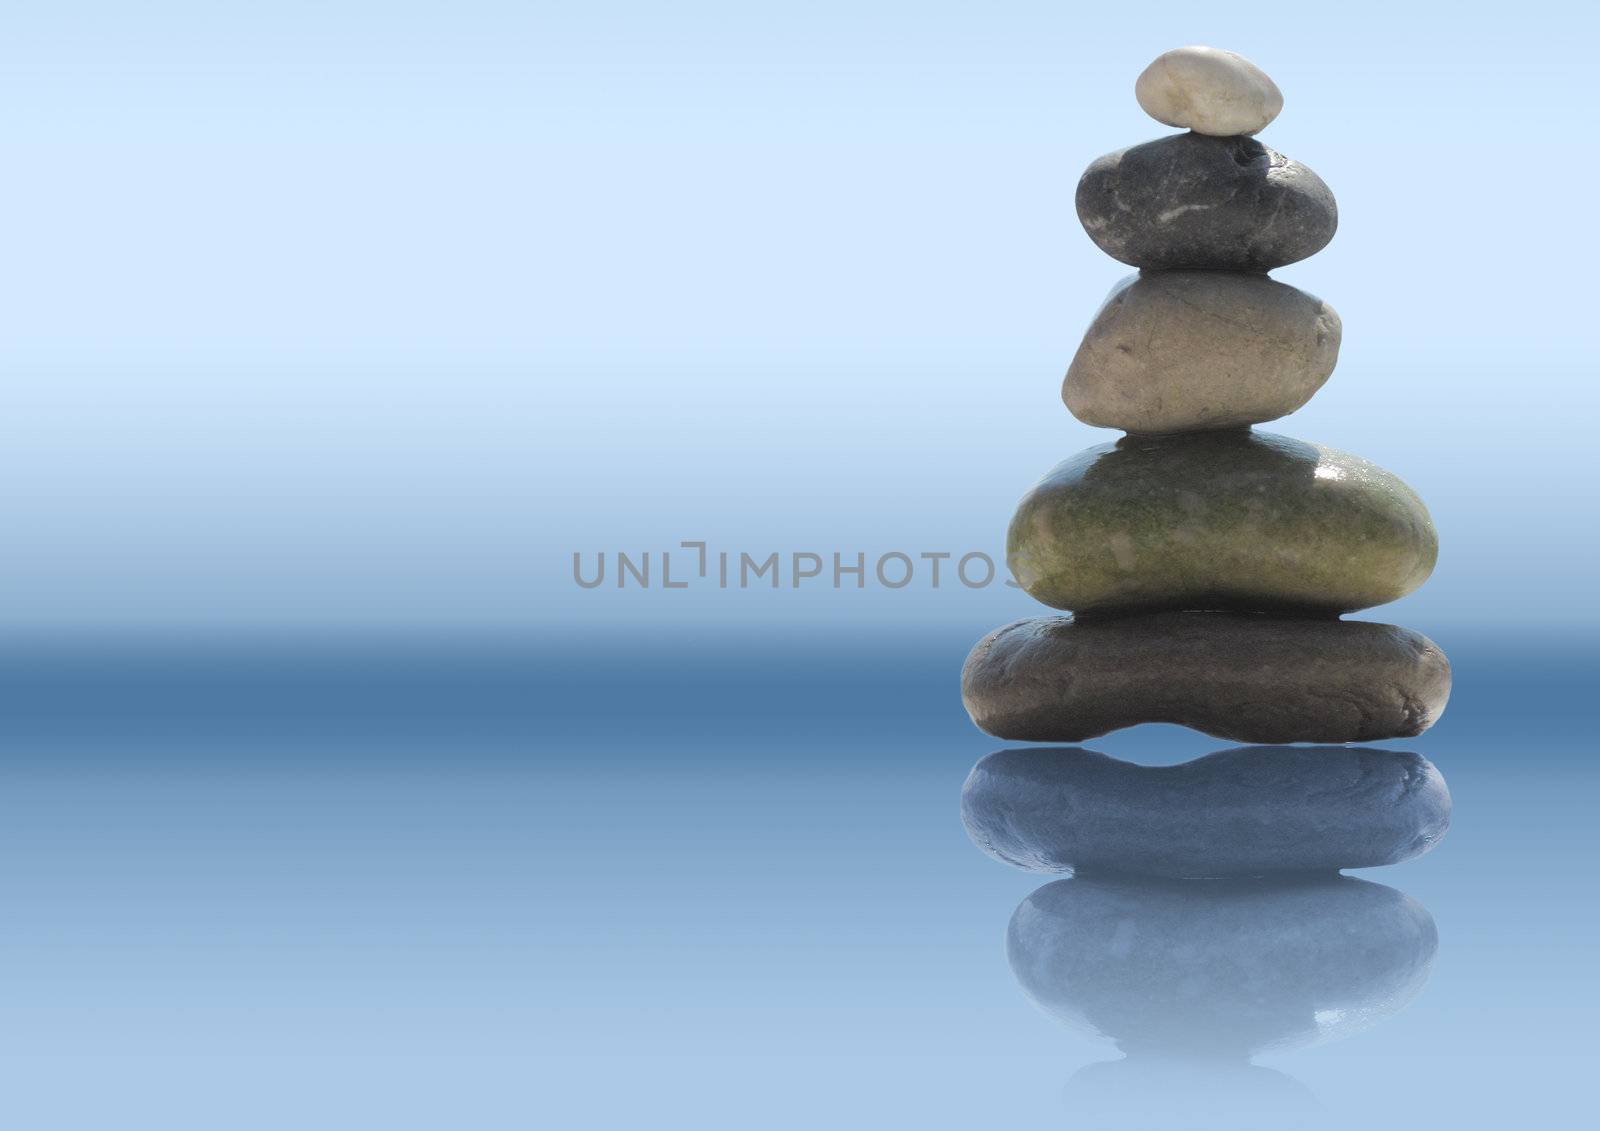 The stack of pebble stones in zen concept on blue